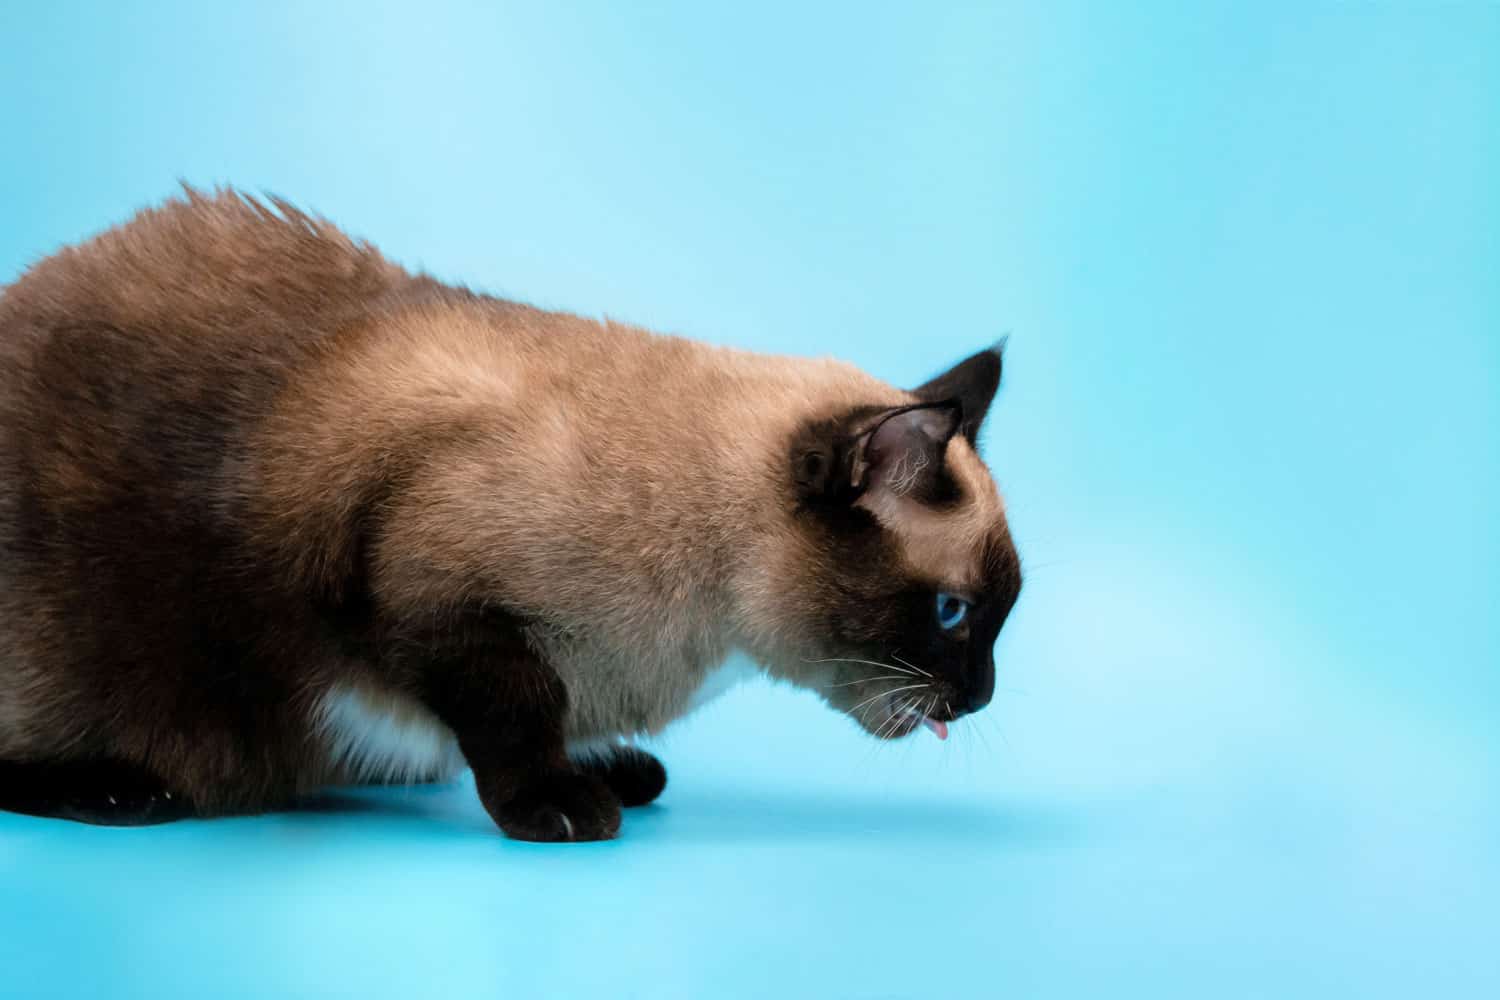 Cat throwing up on a blue background